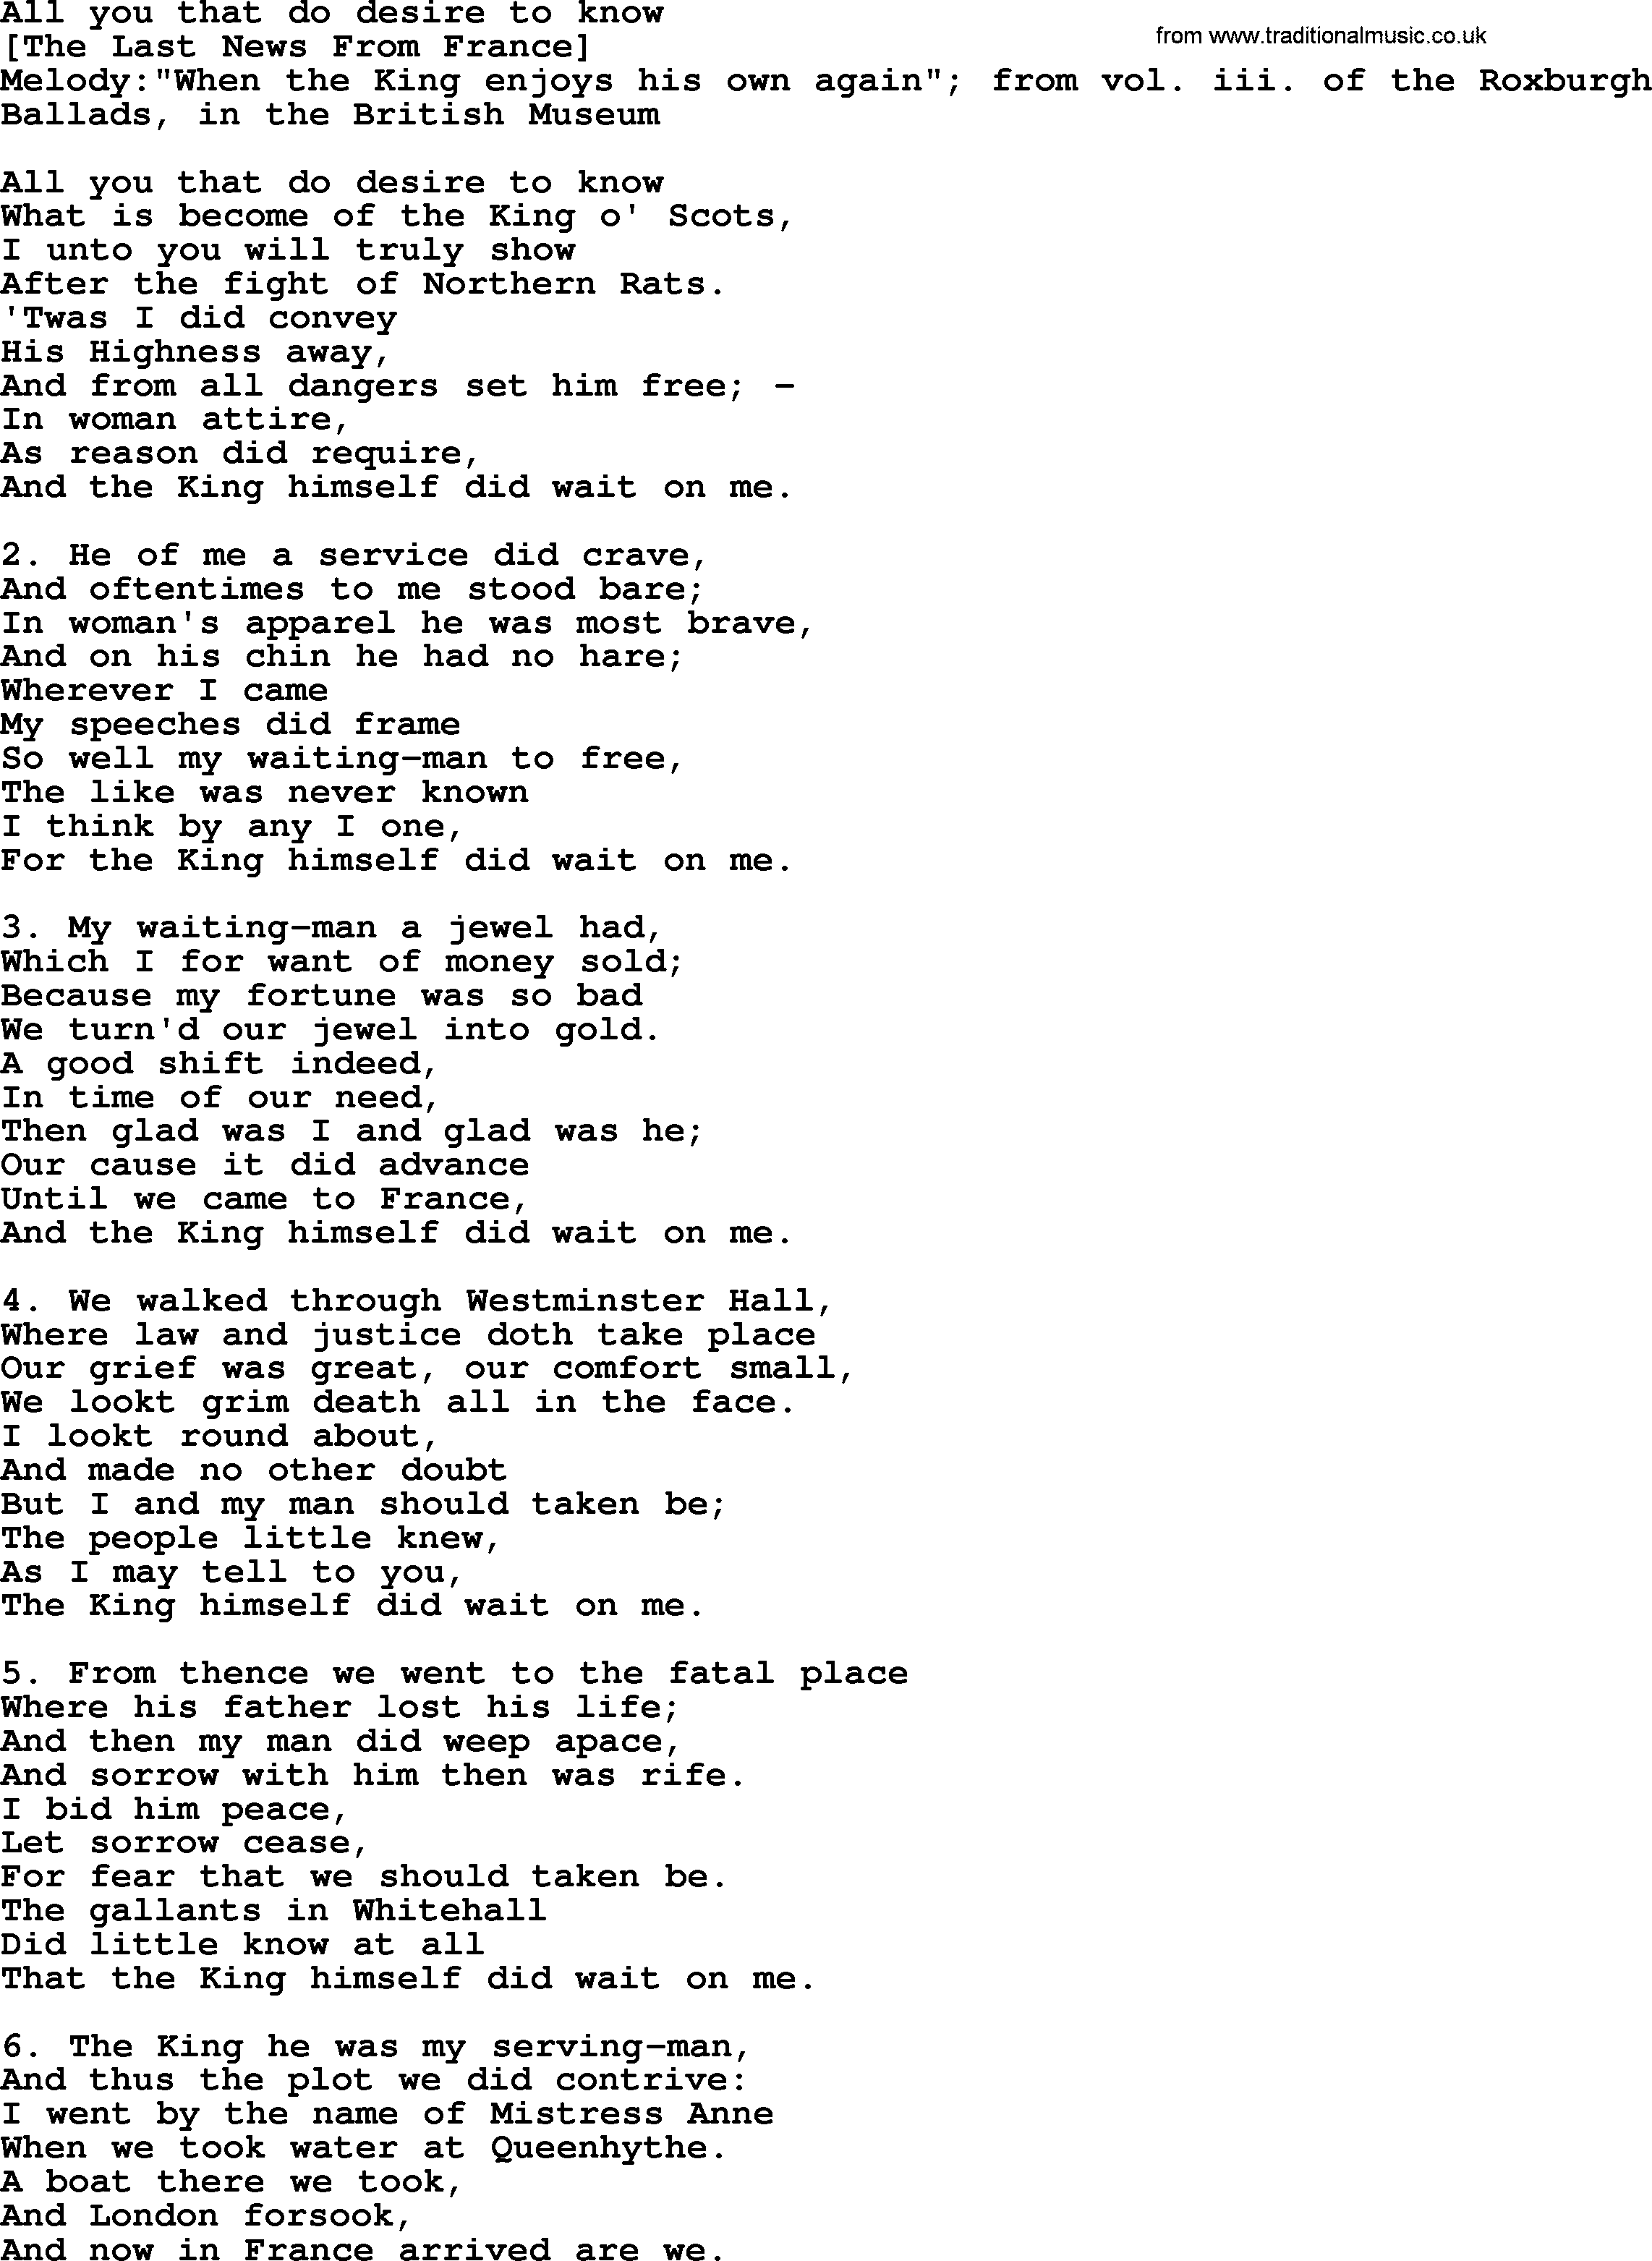 Old English Song: All You That Do Desire To Know lyrics